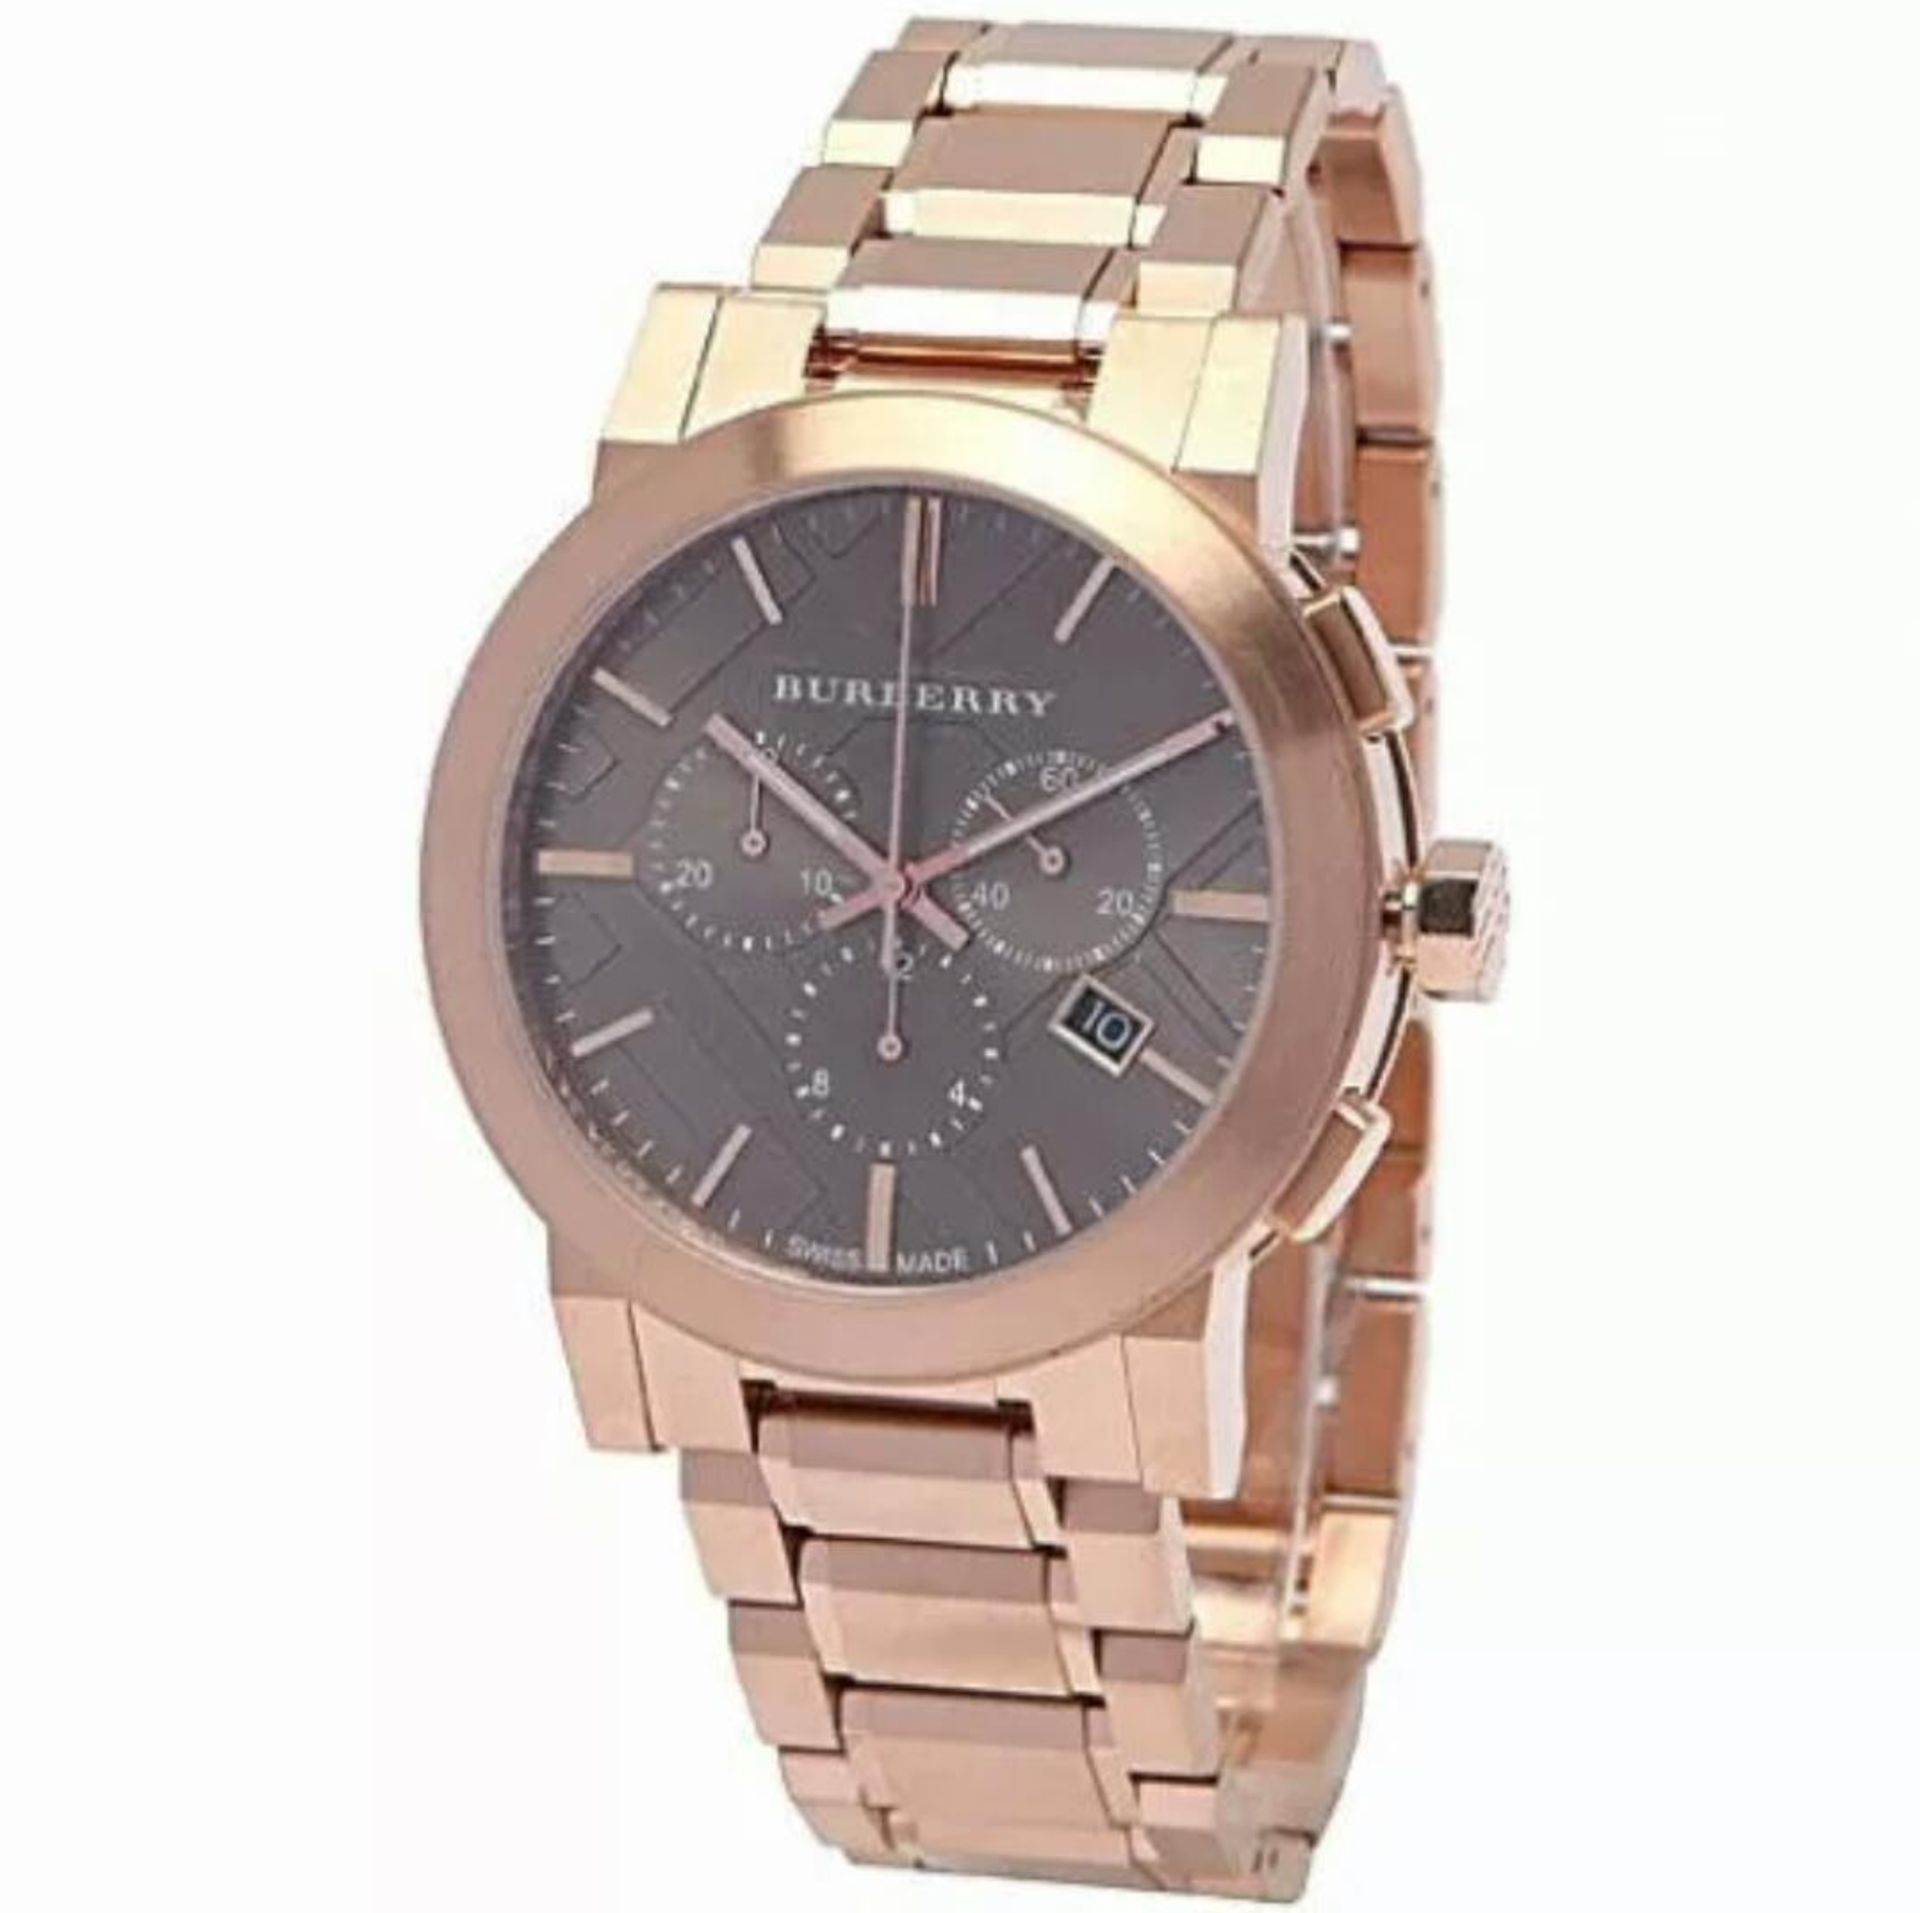 BRAND NEW BURBERRY BU9353, GENTS TAUPE DIAL ROSE GOLD CHRONOGRAPH WATCH, WITH A ROSE GOLD BRACELET -